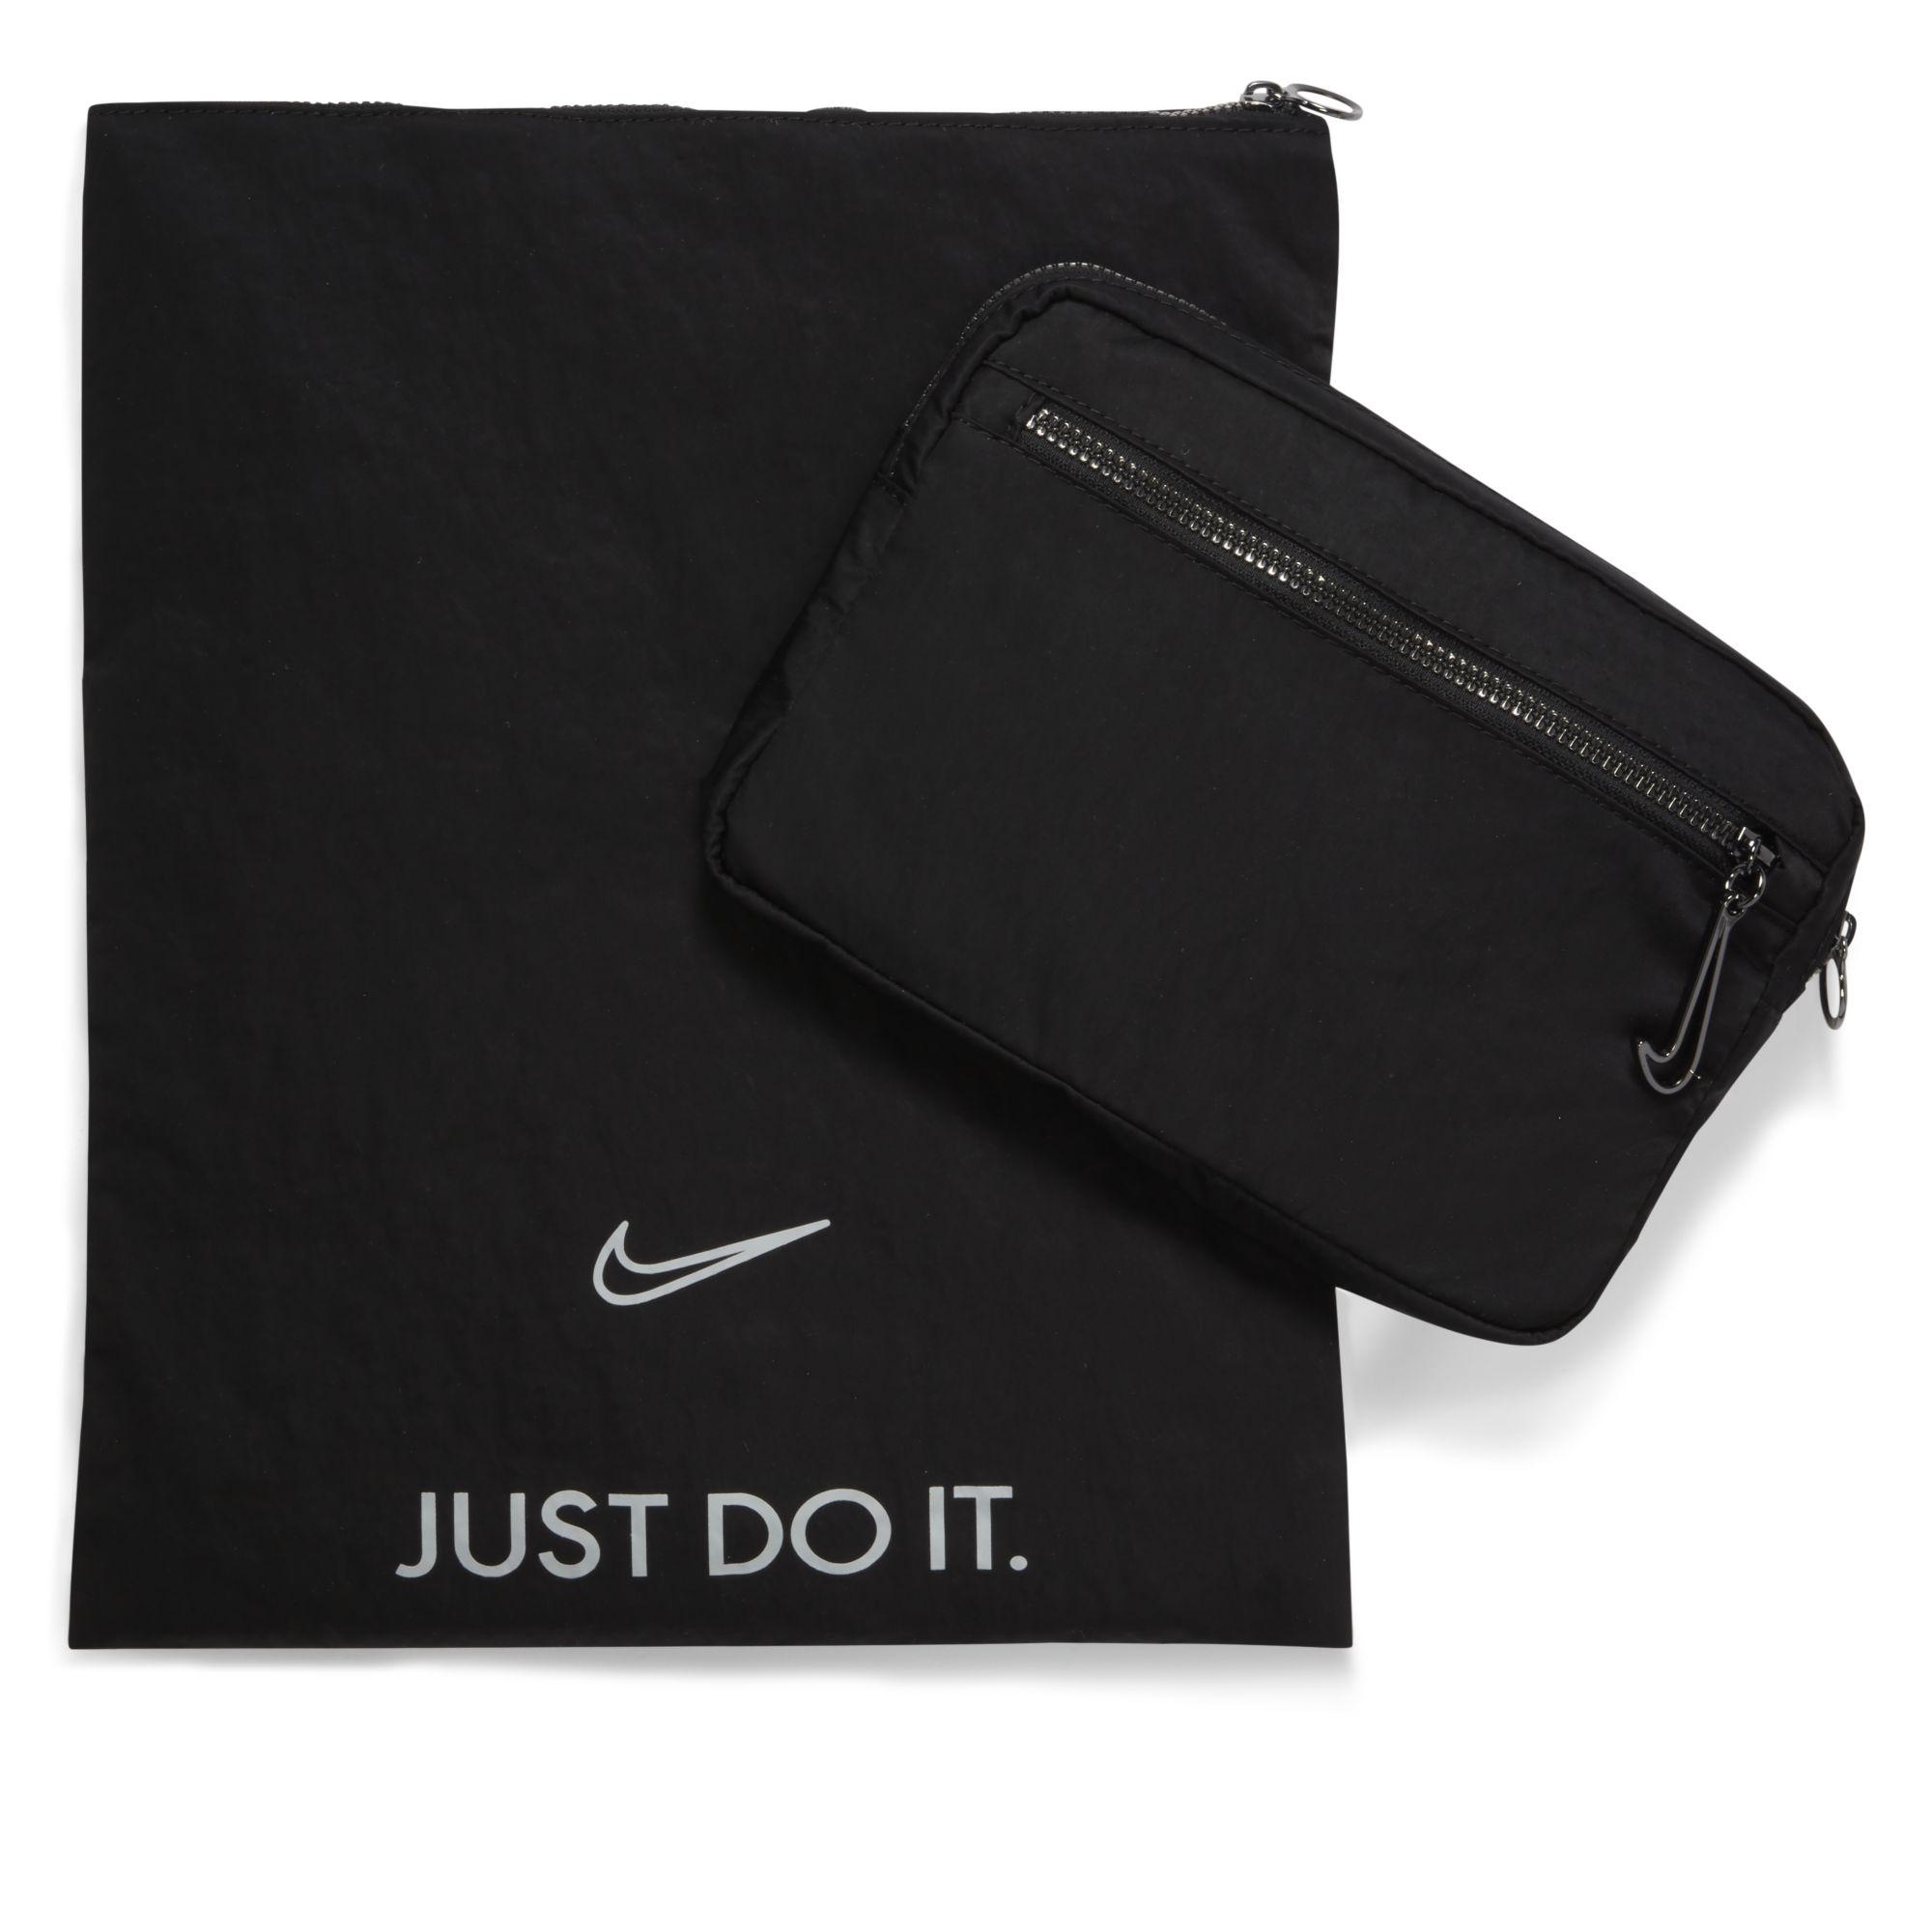 Nike One Luxe Training Bag in Black